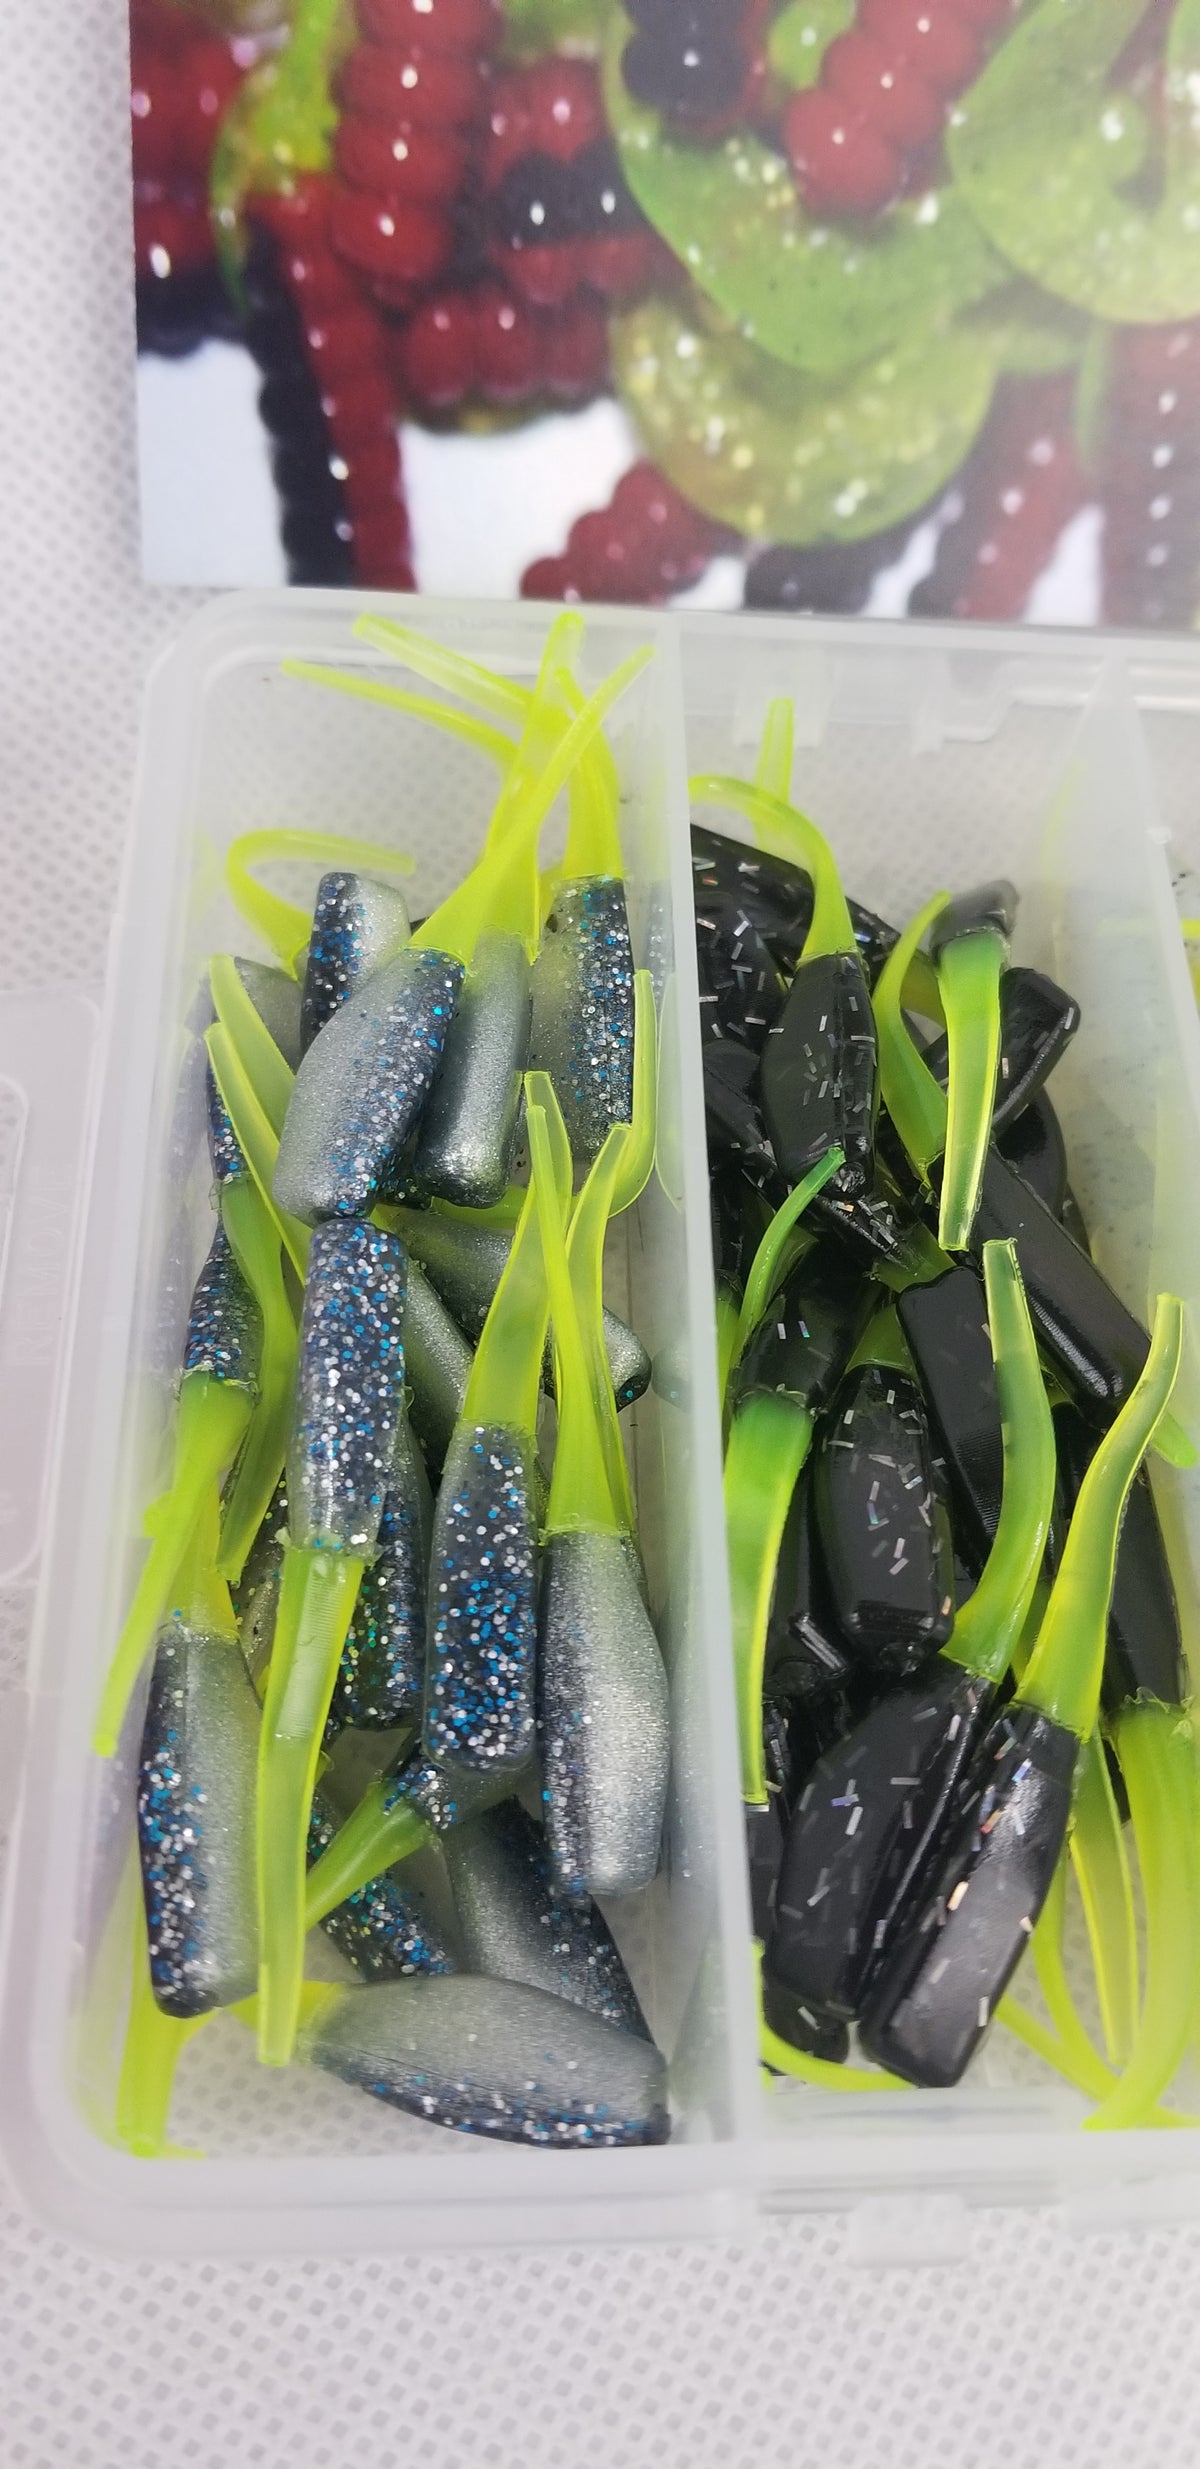 Cam's 3 in 1 Kit Combo [270pc.] Hand Painted Assortment "Nasty Bend Hooks" & All Plastic Curly Tail & Stinger Shad [Hologram Flake] Assortment Kit